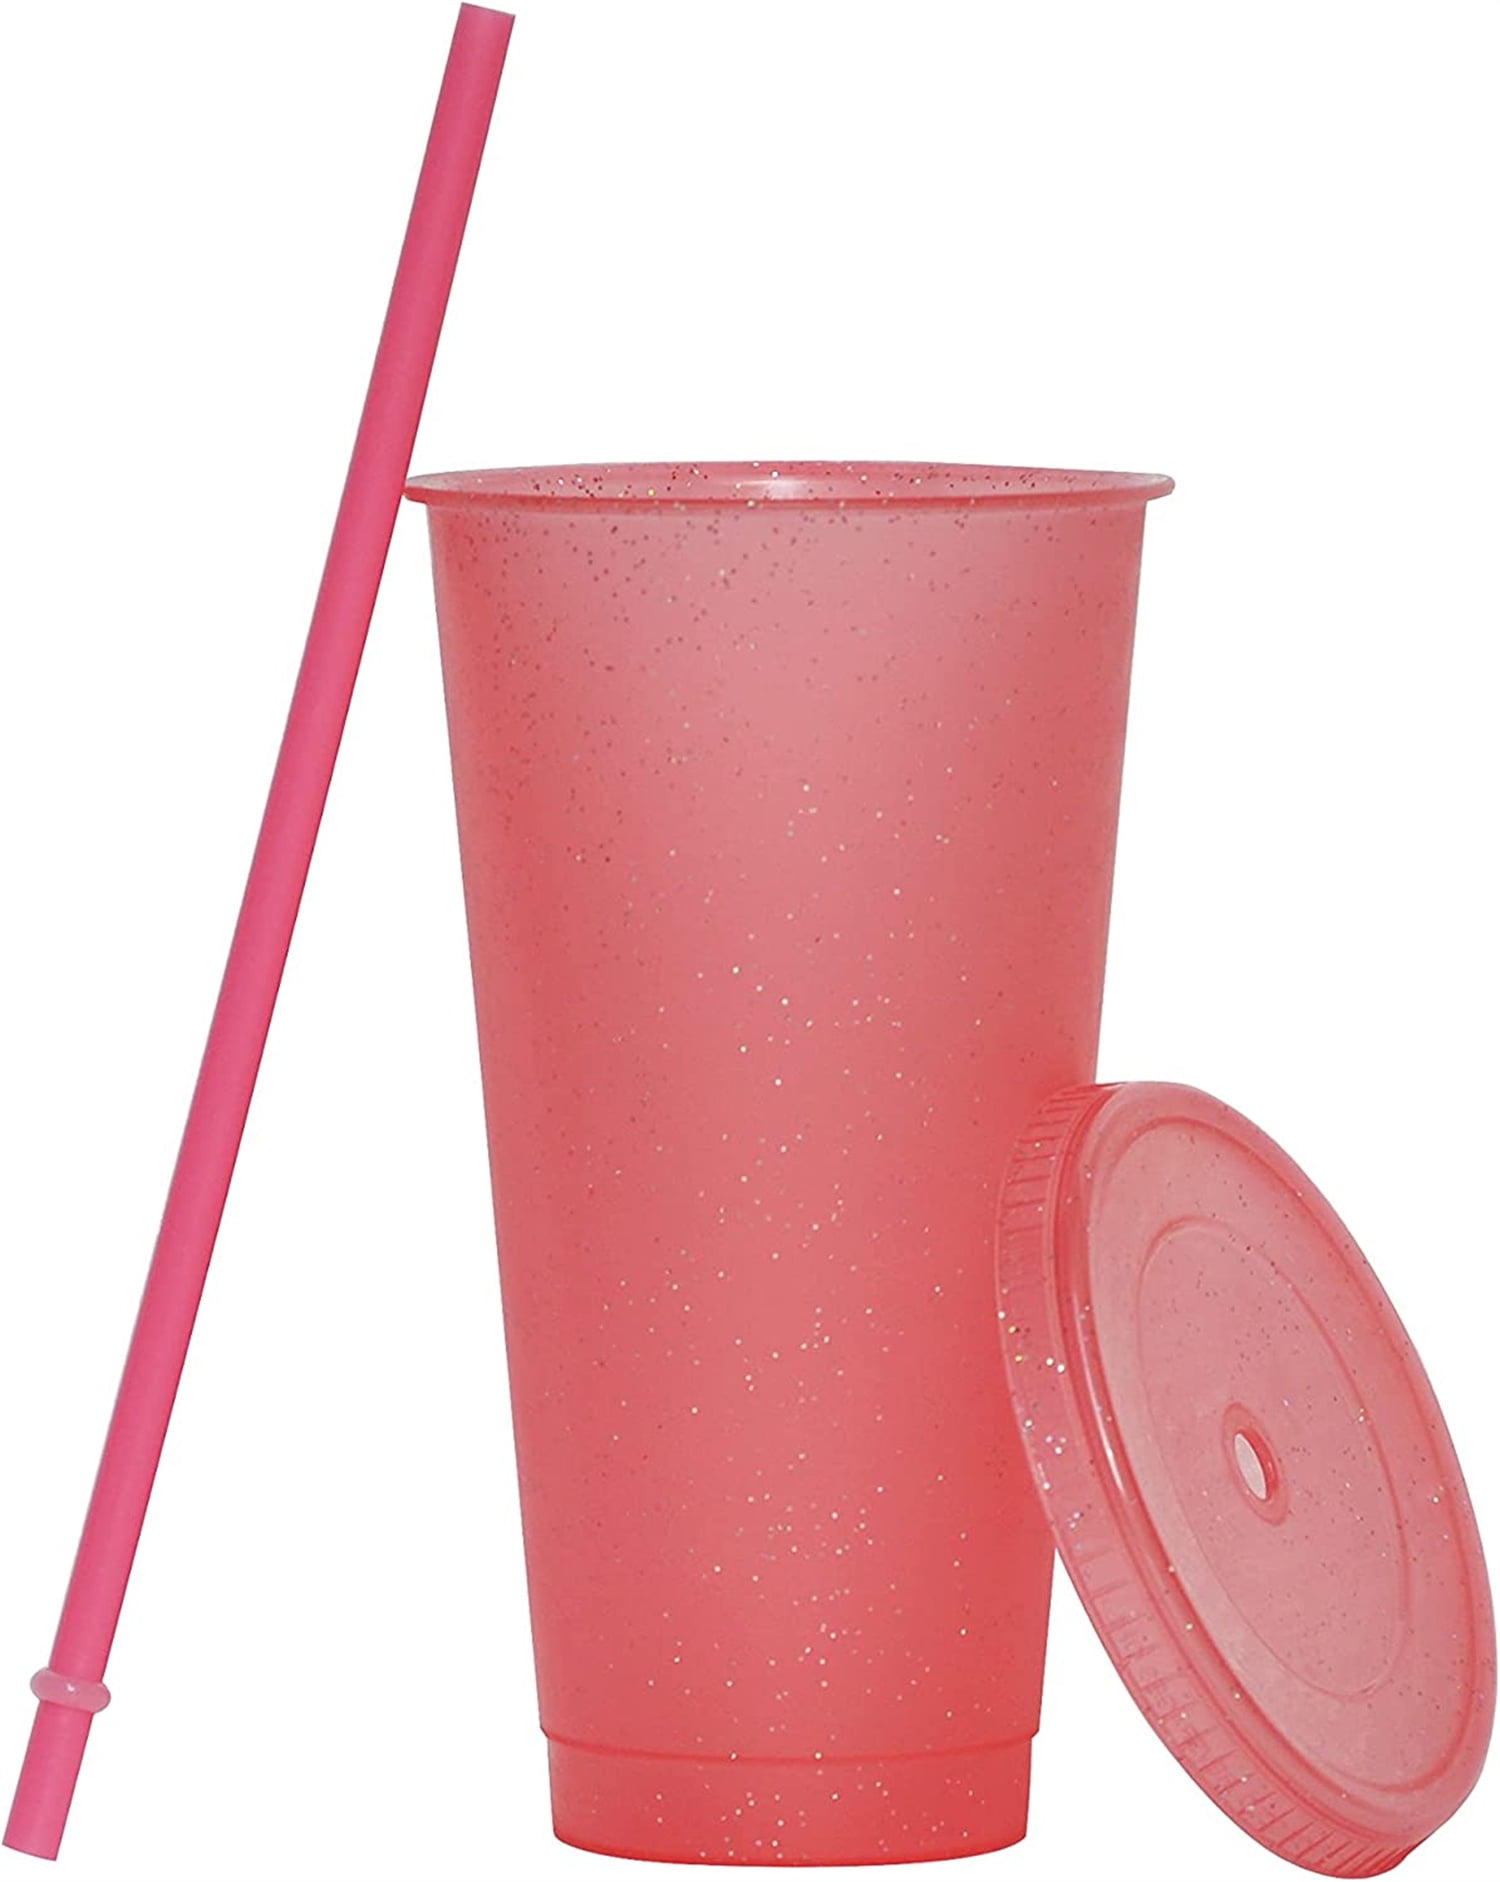 Large Plastic Cups - 6 Cups interchangeable lids Pink & Yellow w